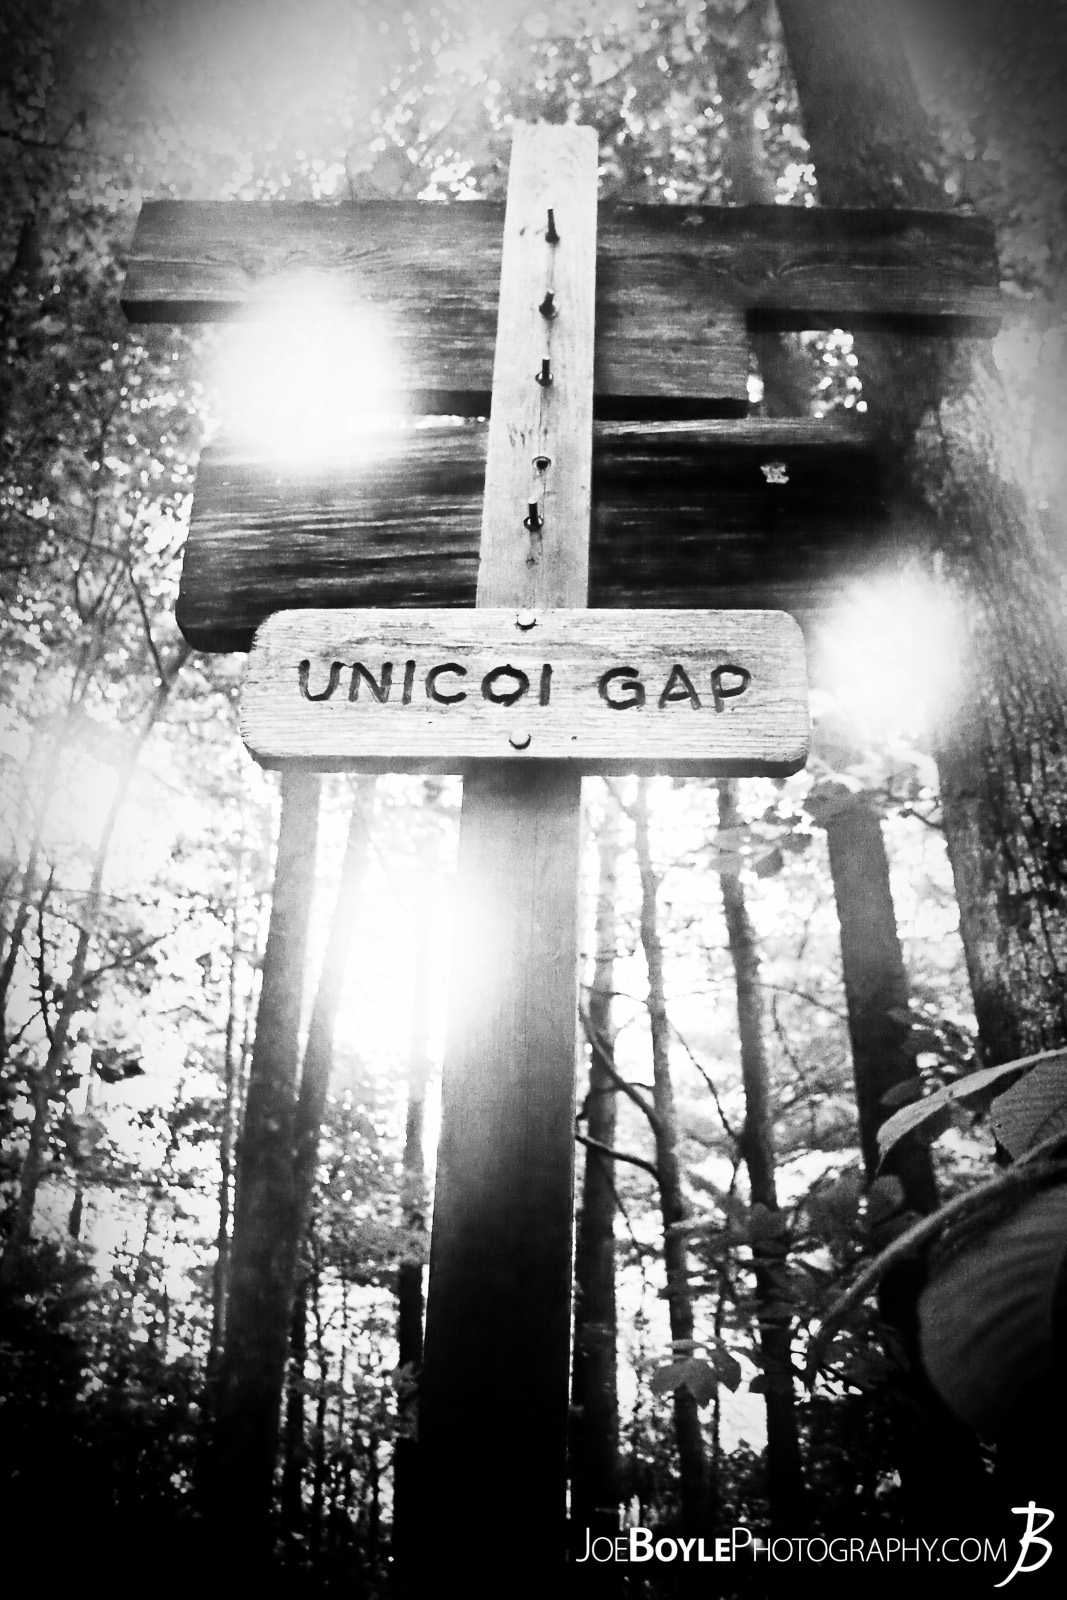  As I was hiking a segment of the Appalachian Trail we ended at Unicoi Gap. It was a hard trek for me as it was one of my first week long backpacking trips so making it to the "finish line" was a welcome sight! 